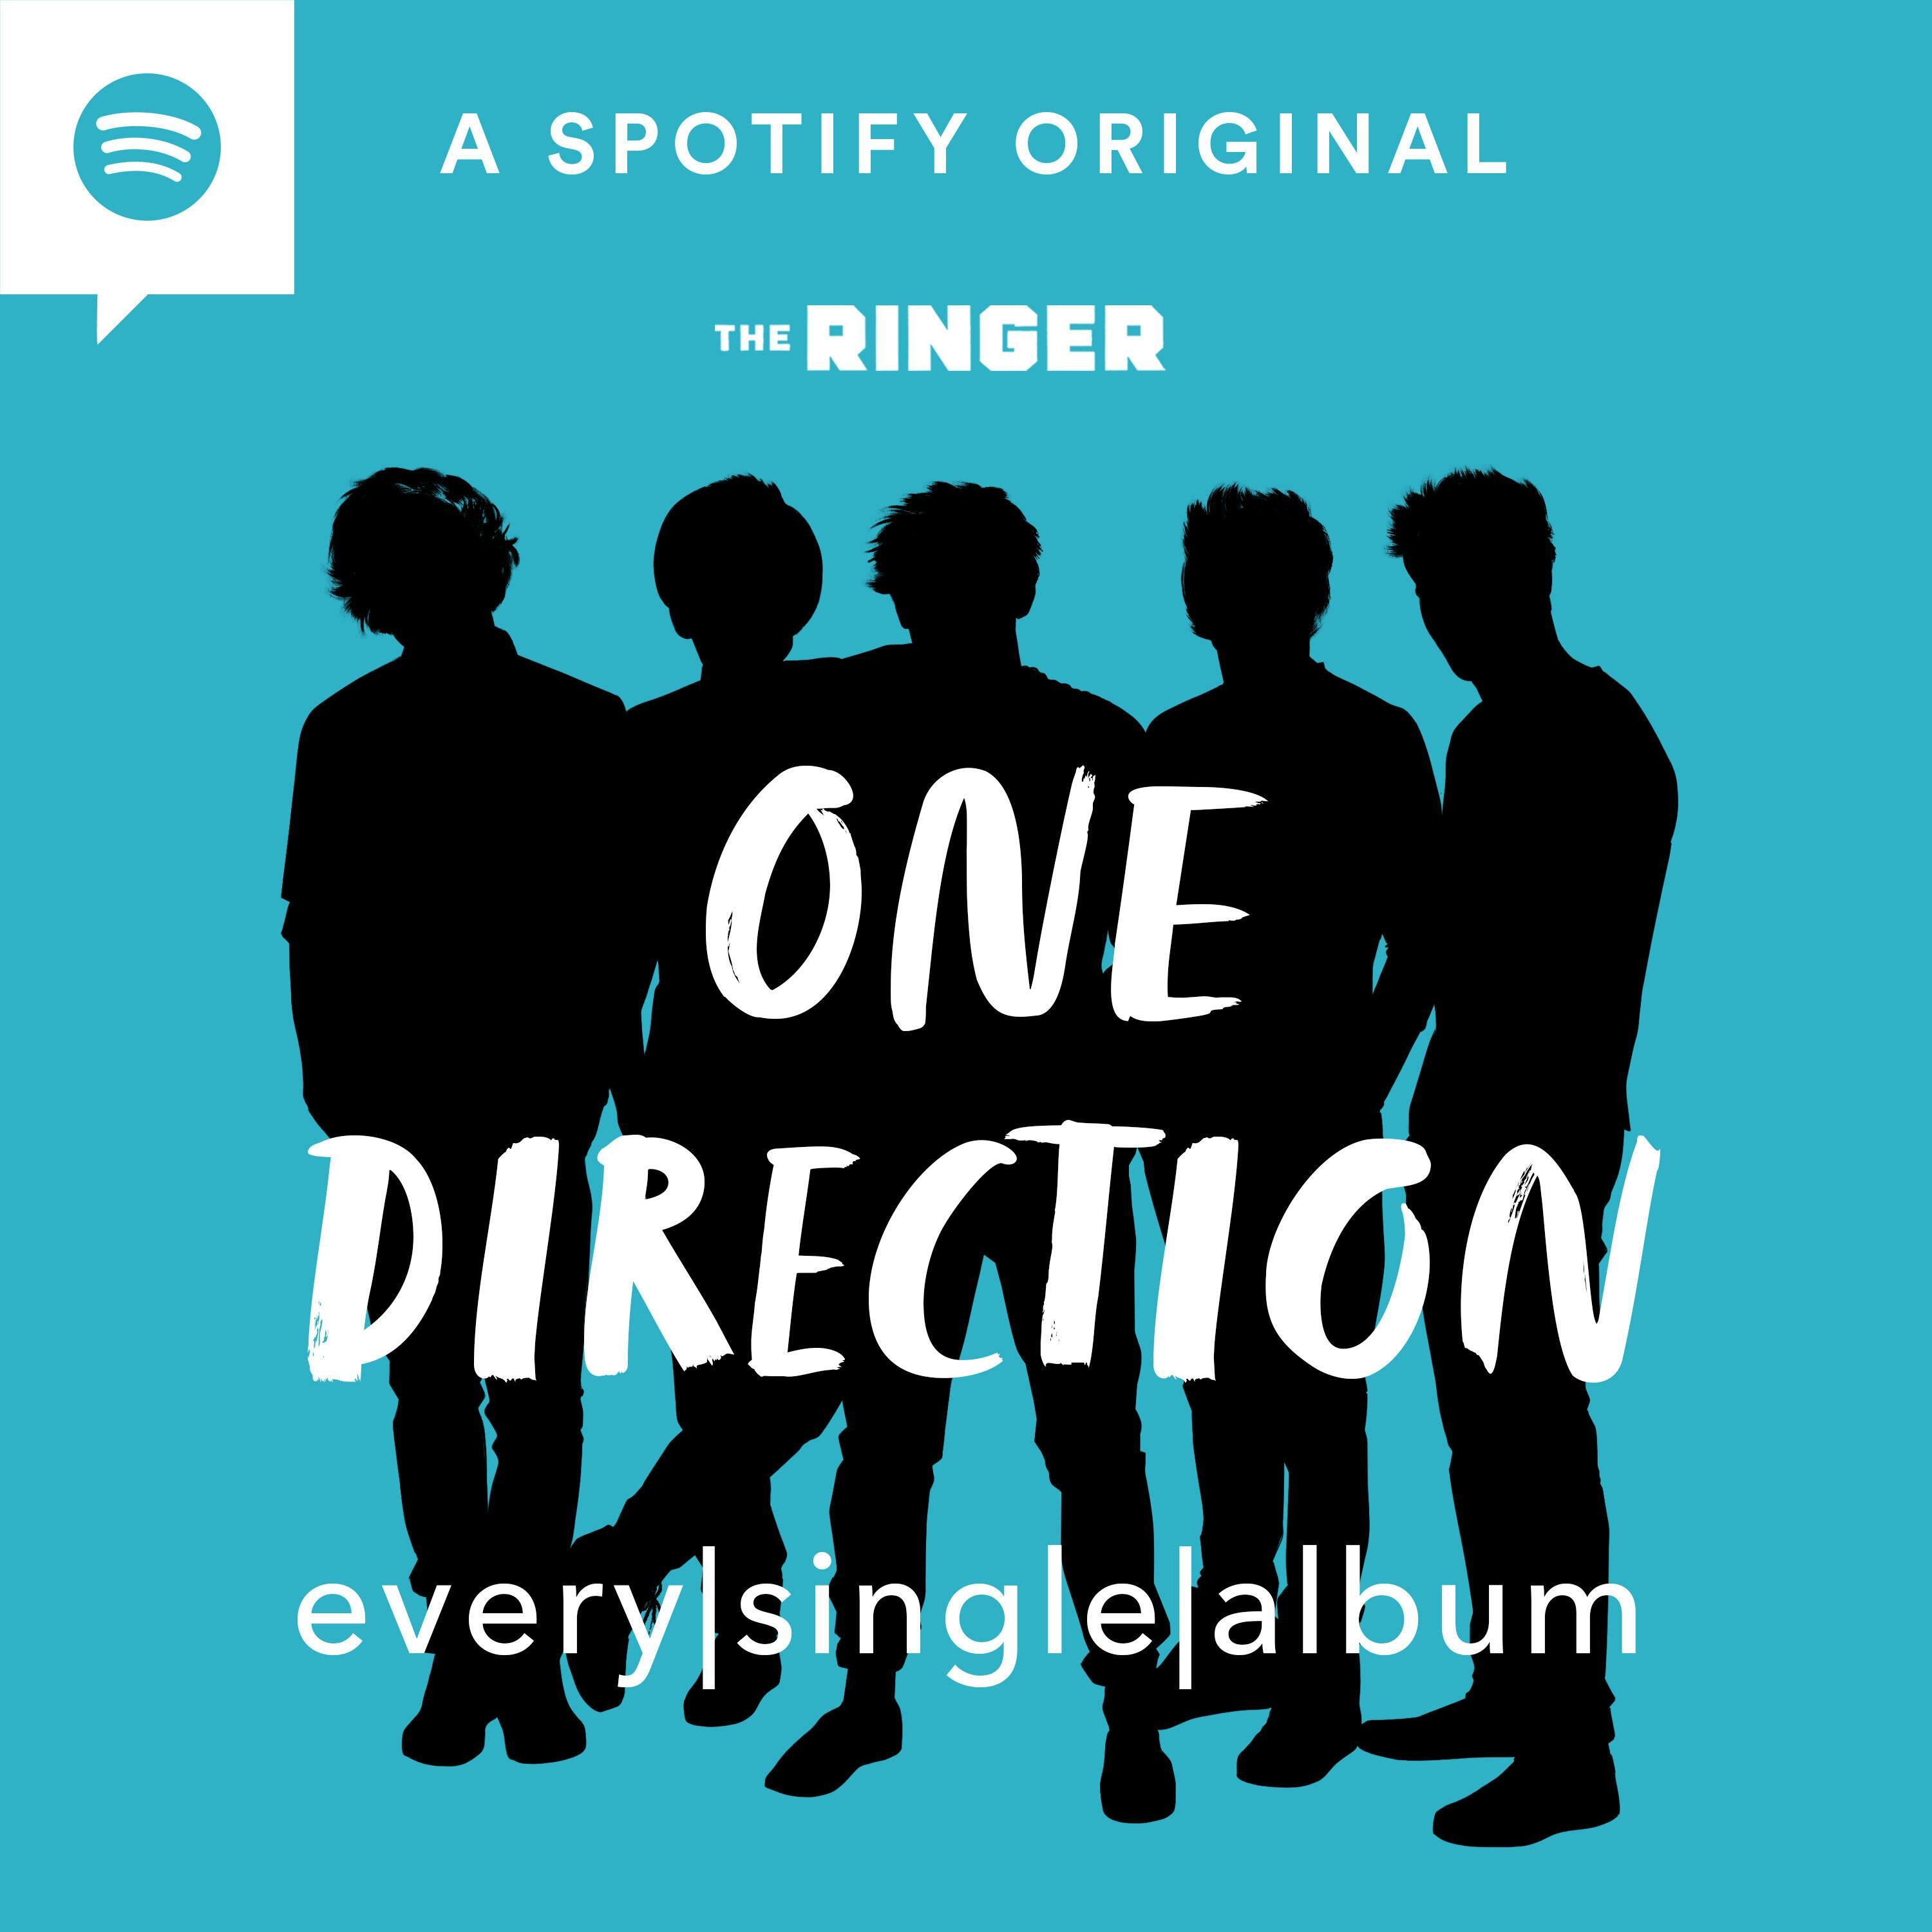 Zayn, Louis, and Liam's Solo Careers | Every Single Album: One Direction